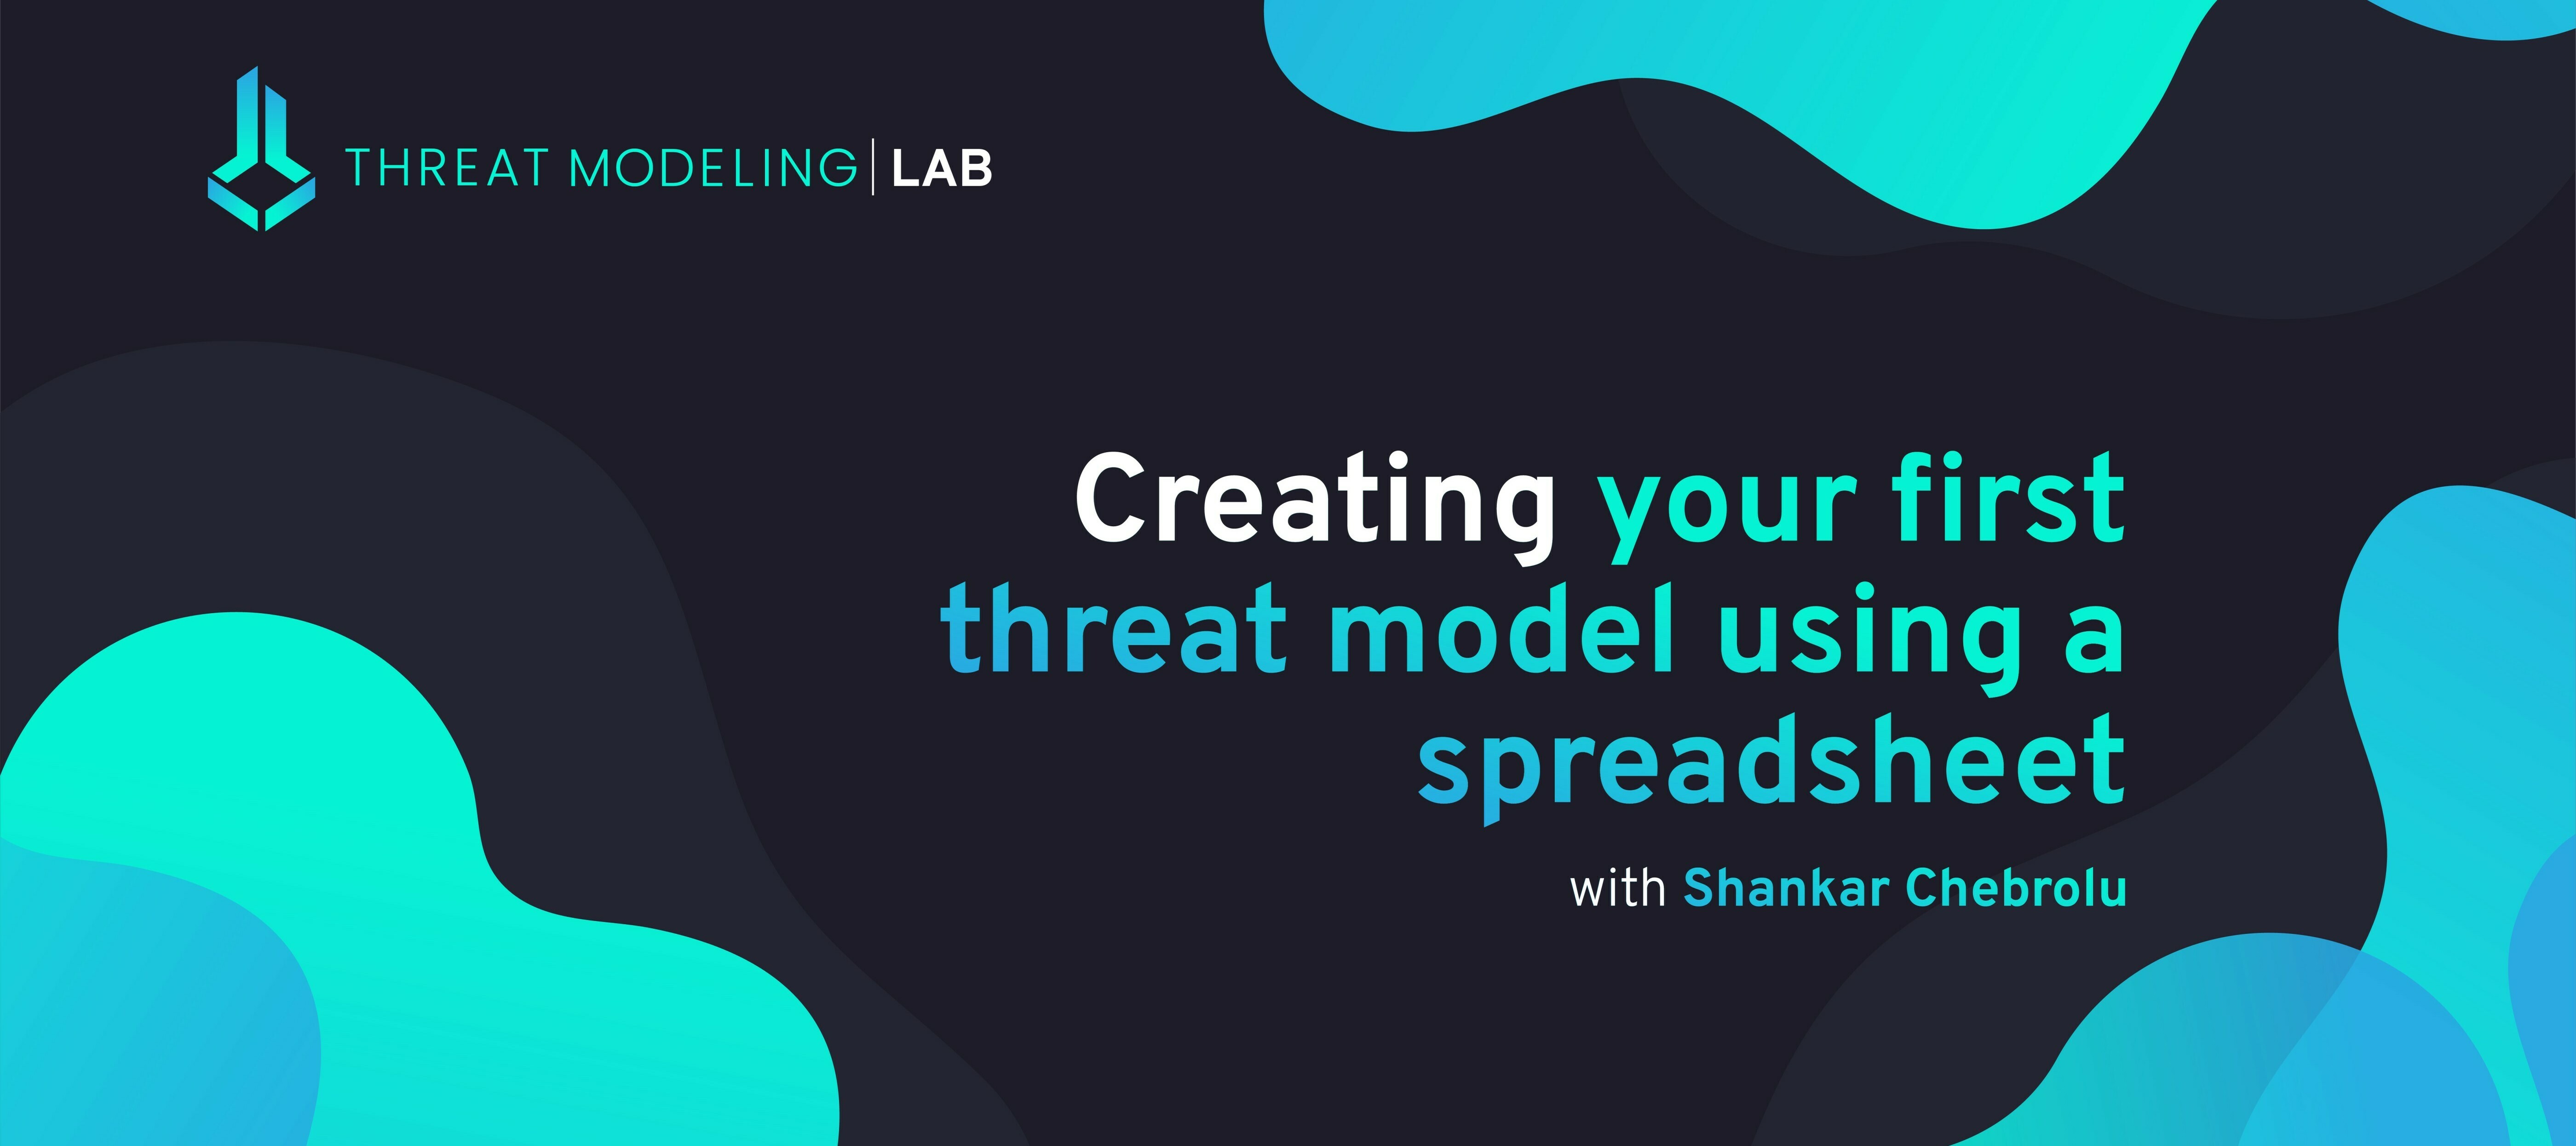 Create Your First Threat Model Using a Spreadsheet